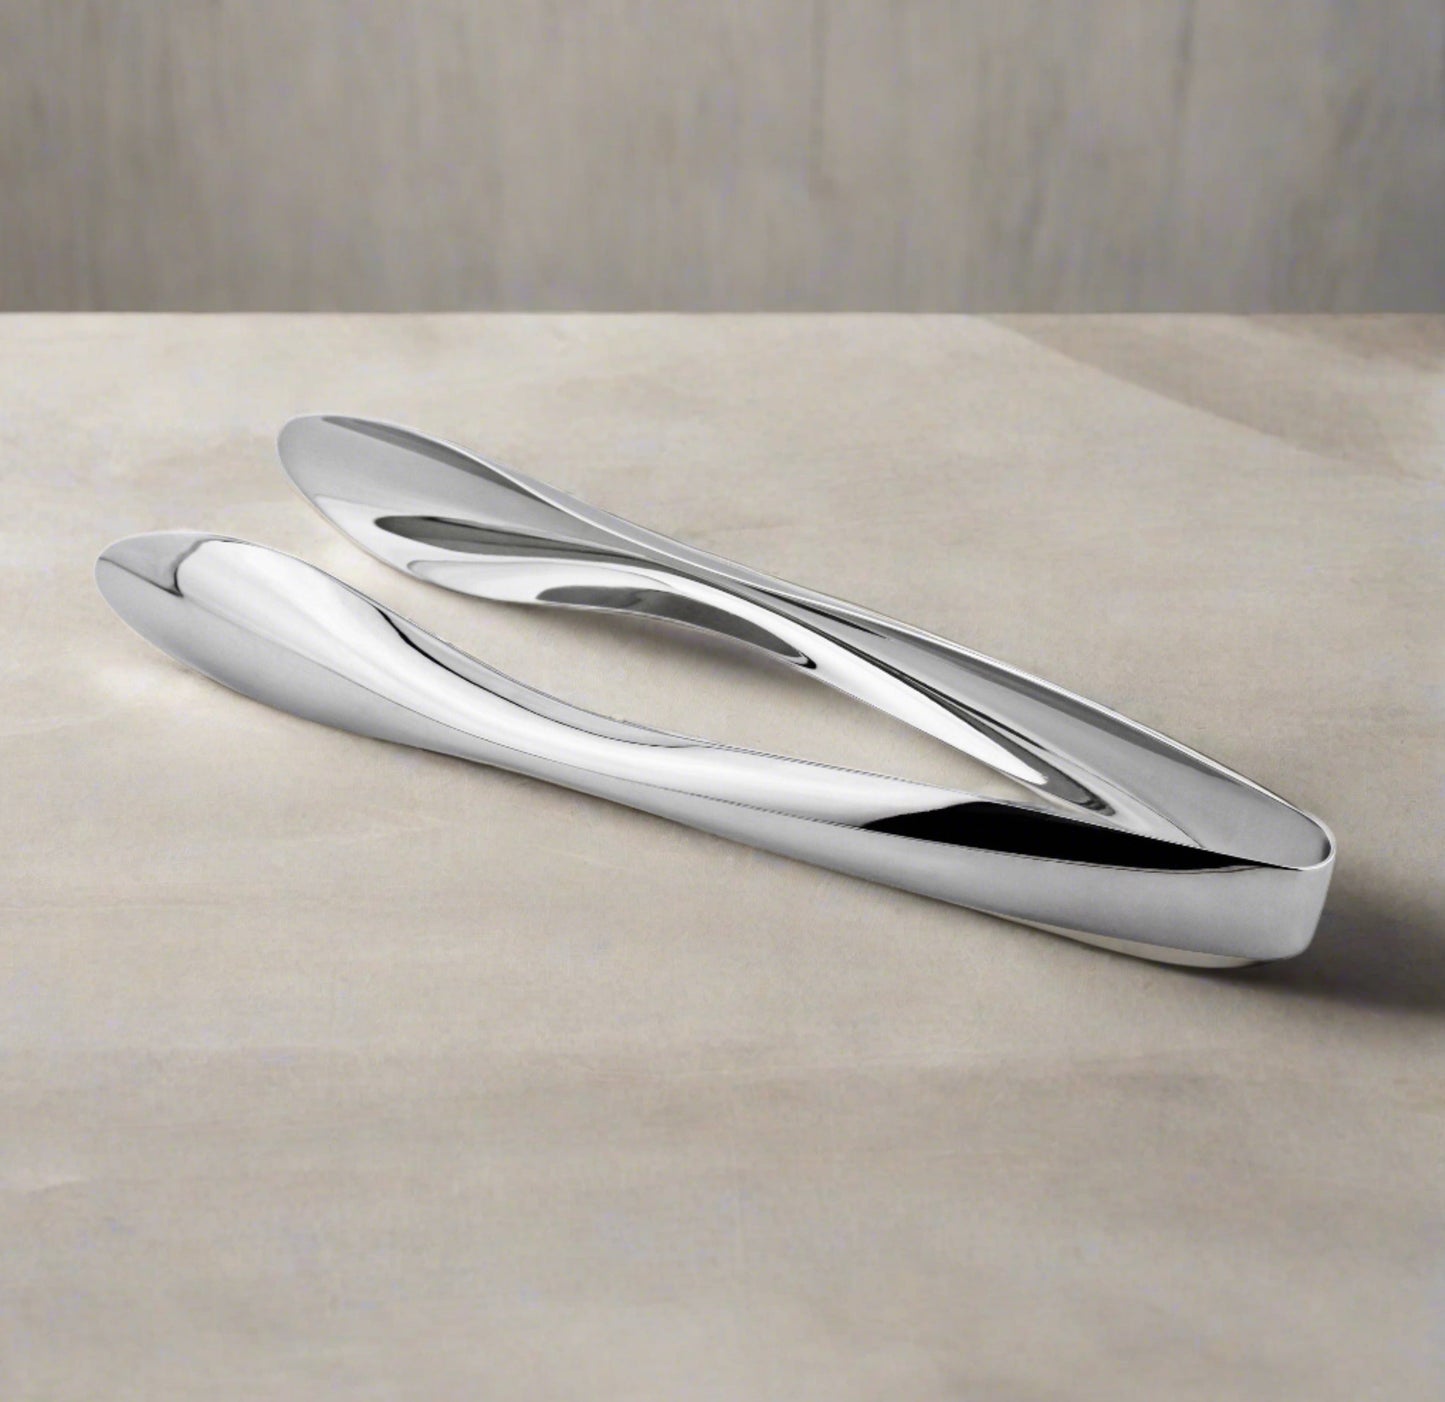 Cuisinox Serving Tong, available in 2 sizes